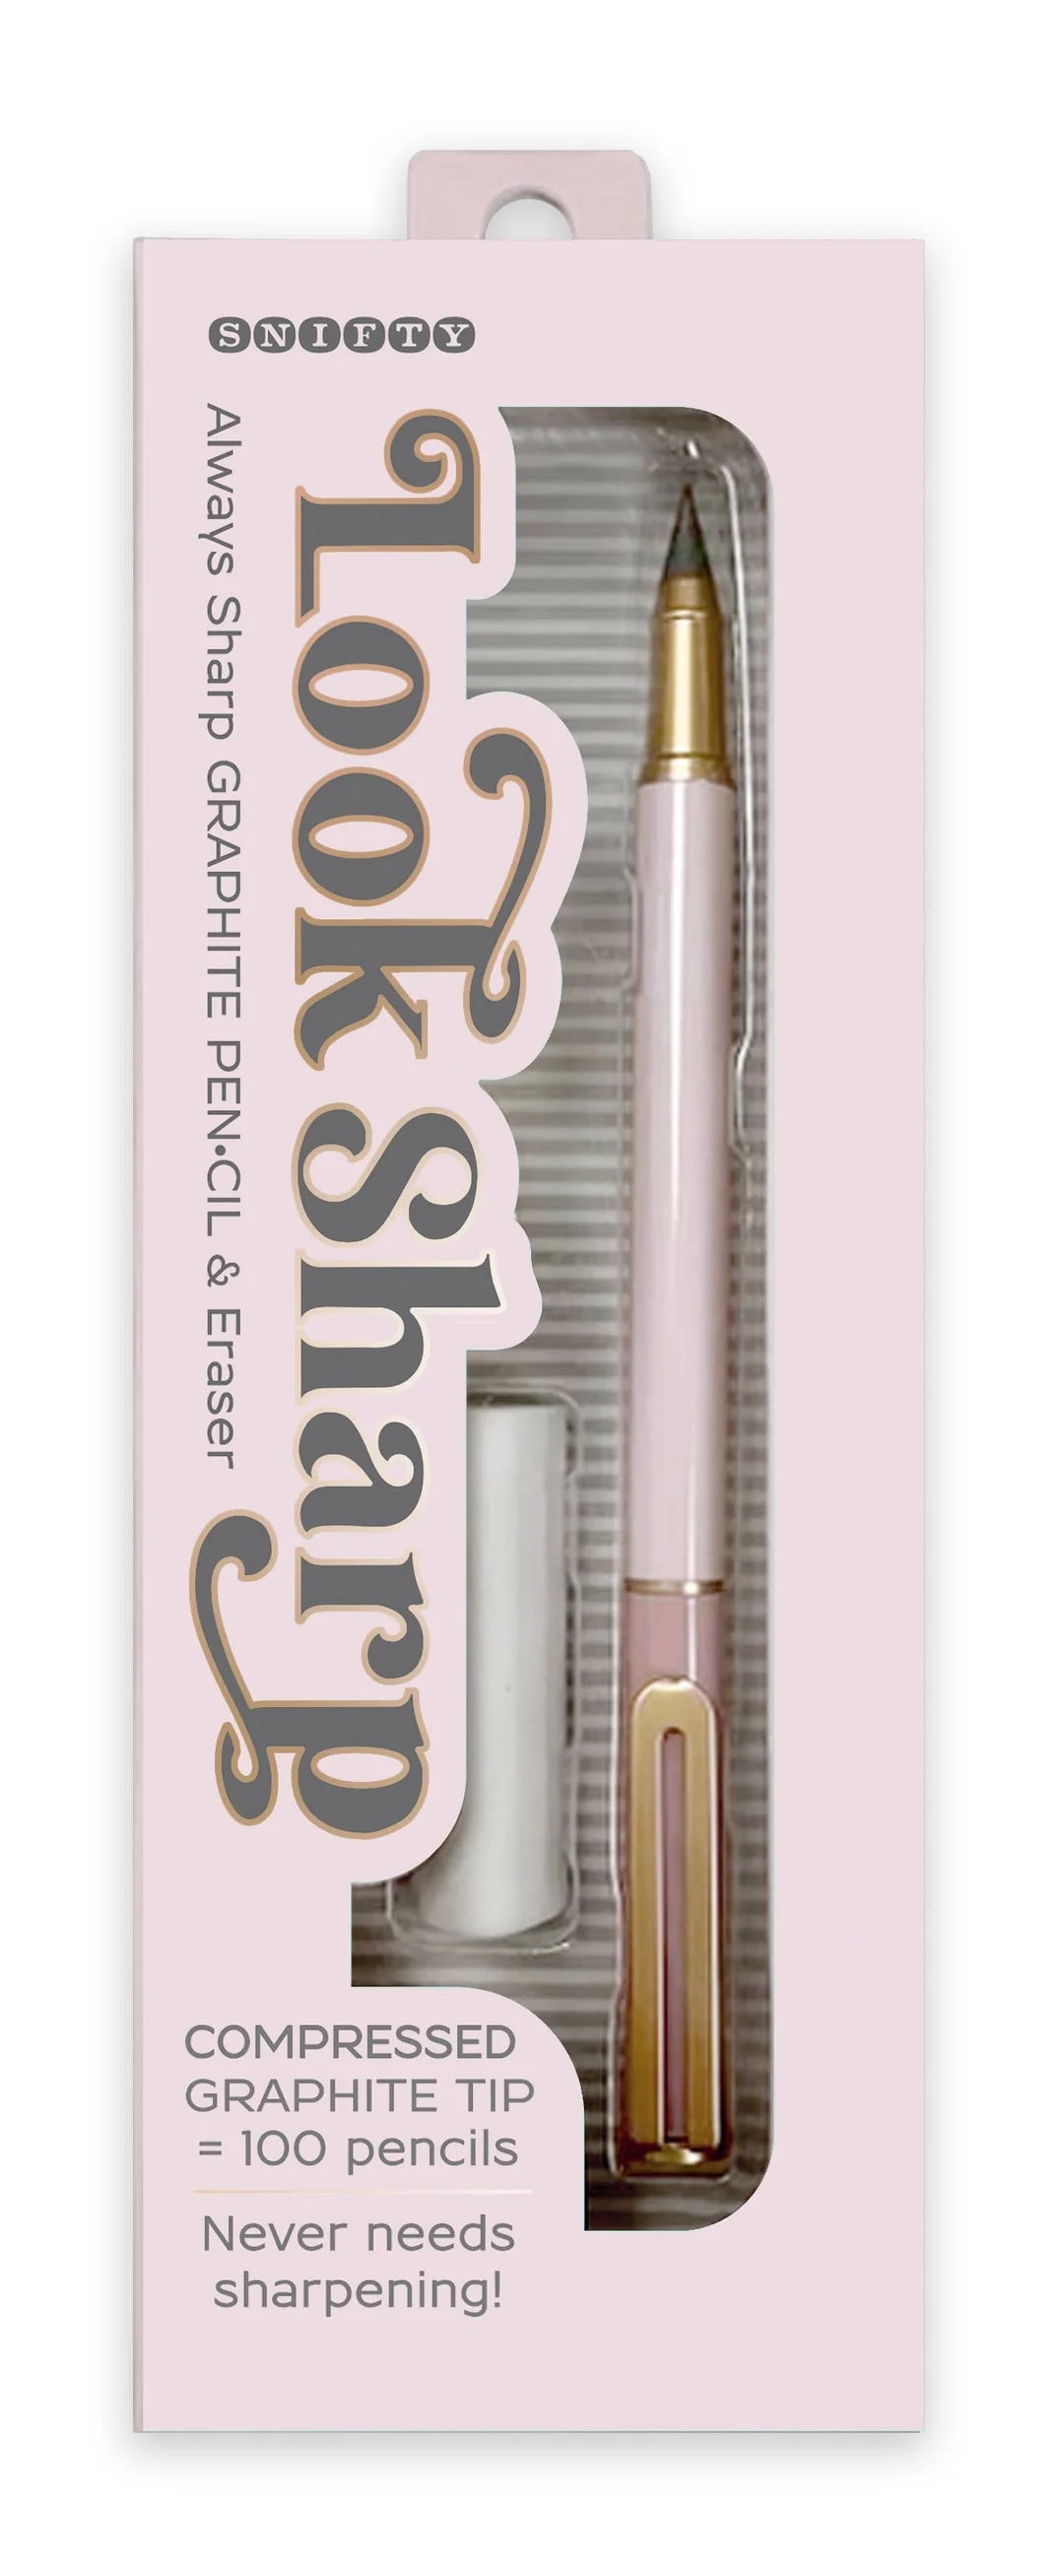 blush look sharp pencil in its box packaging with eraser.